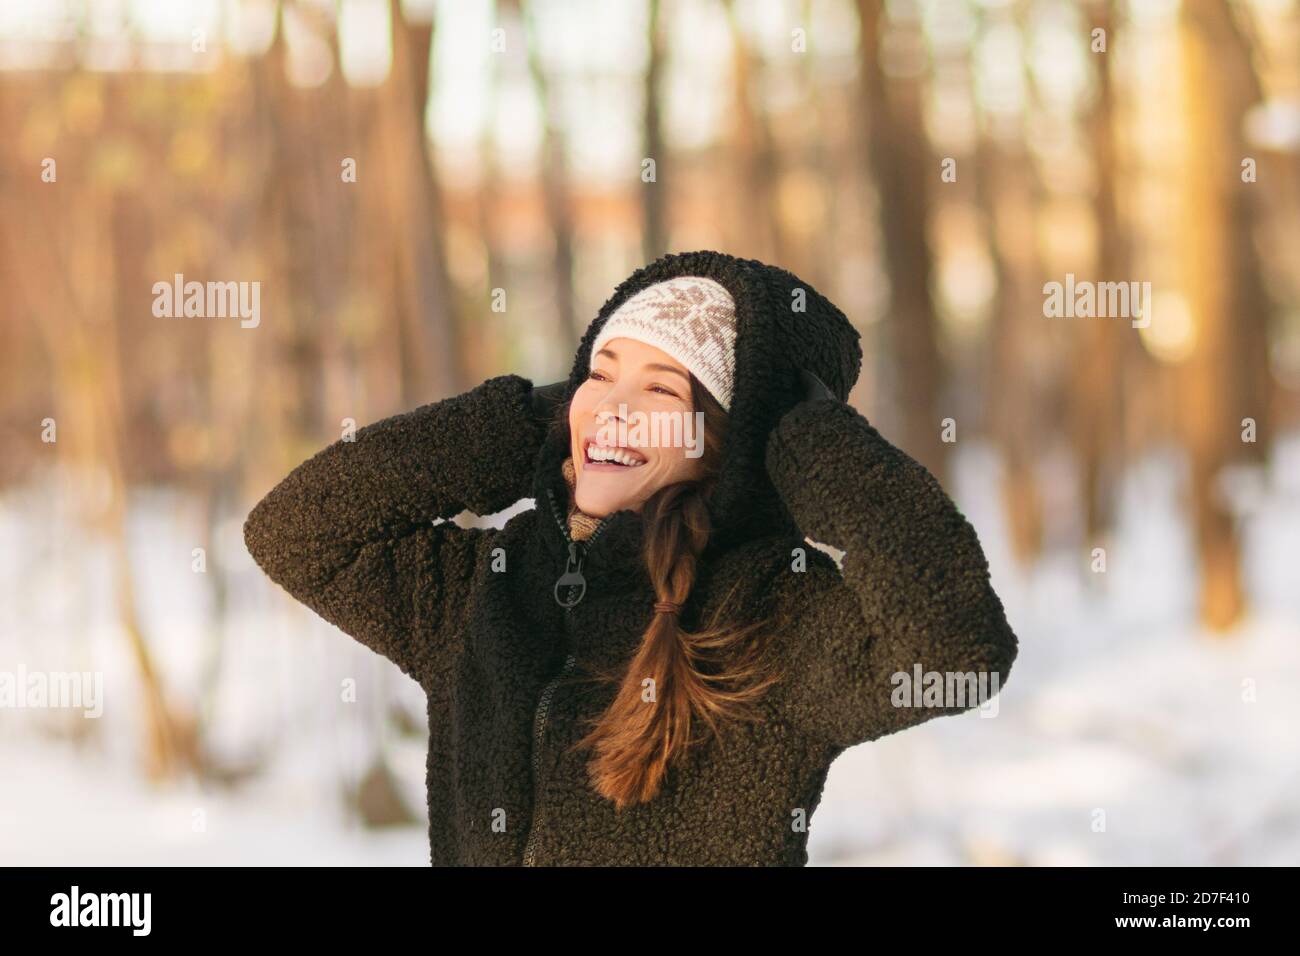 Winter snow fun happy girl walking outside in cold weather protecting ears holding wool hat over ears active outdoor lifestyle. Asian girl wearing Stock Photo